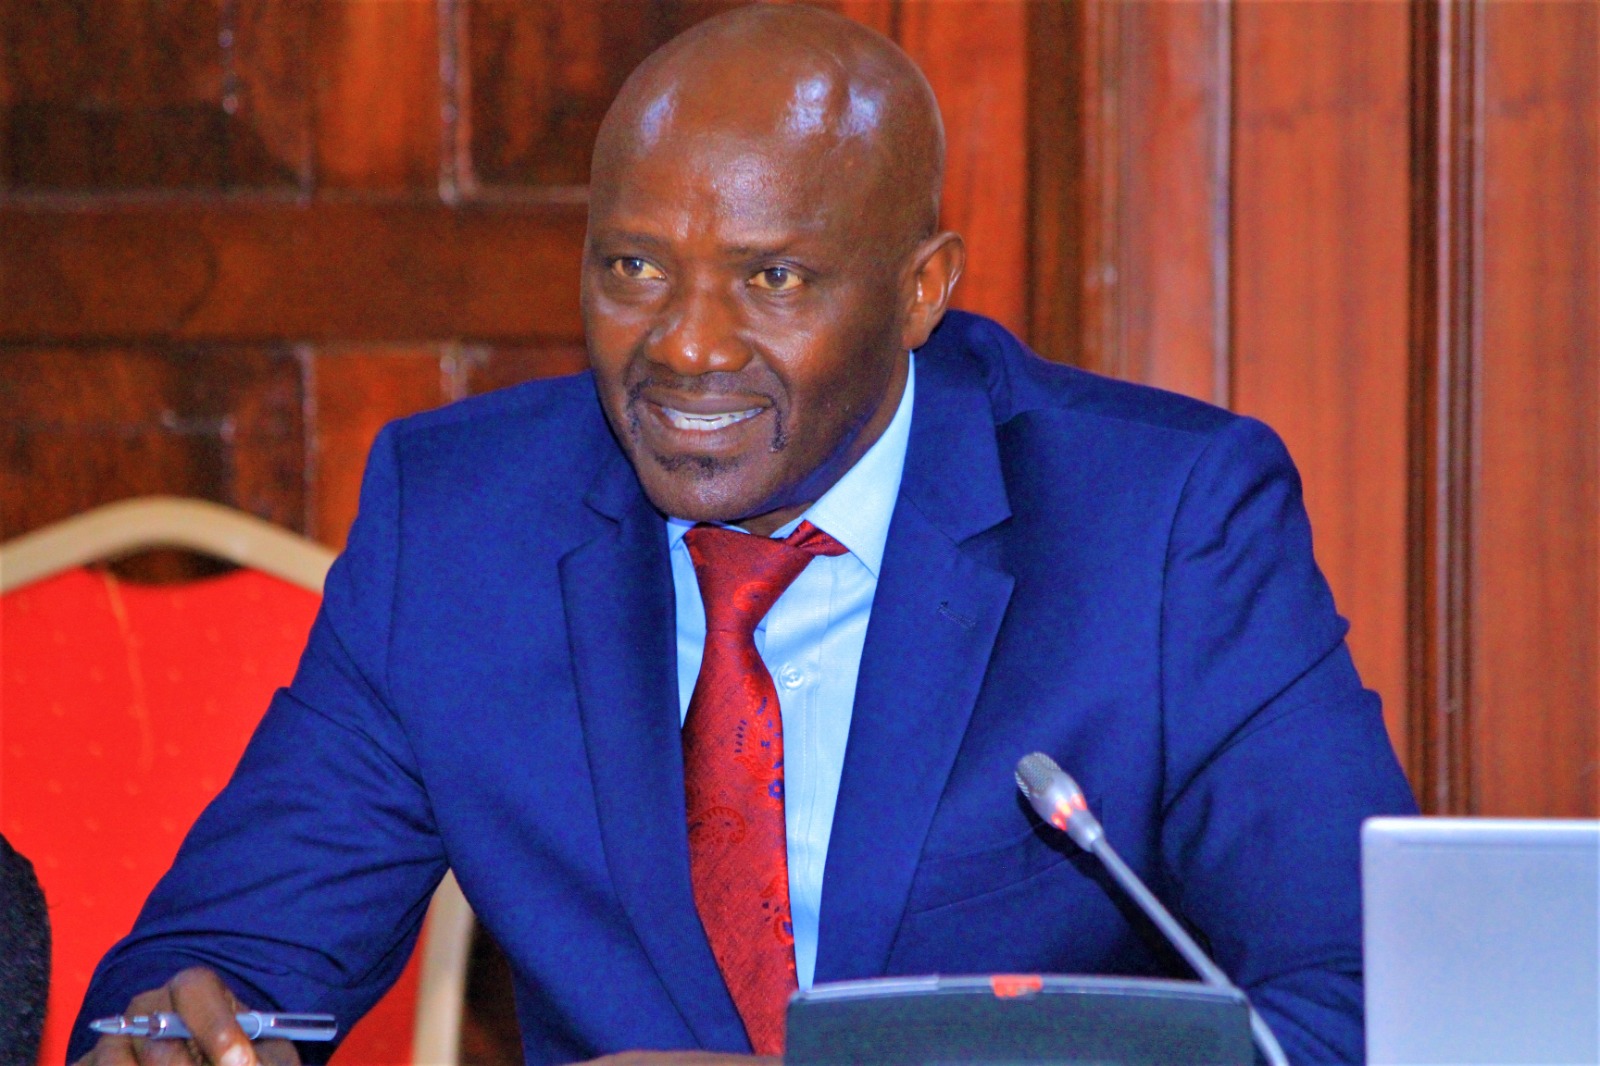 " PROVIDE A STATEMENT ON THE EXPLOITATION OF WATER RESOURCES IN MURANG`A COUNTY BY THE NAIROBI WATER AND SEWERAGE COMPANY,” SEEKS SENATOR JOE NYUTU.